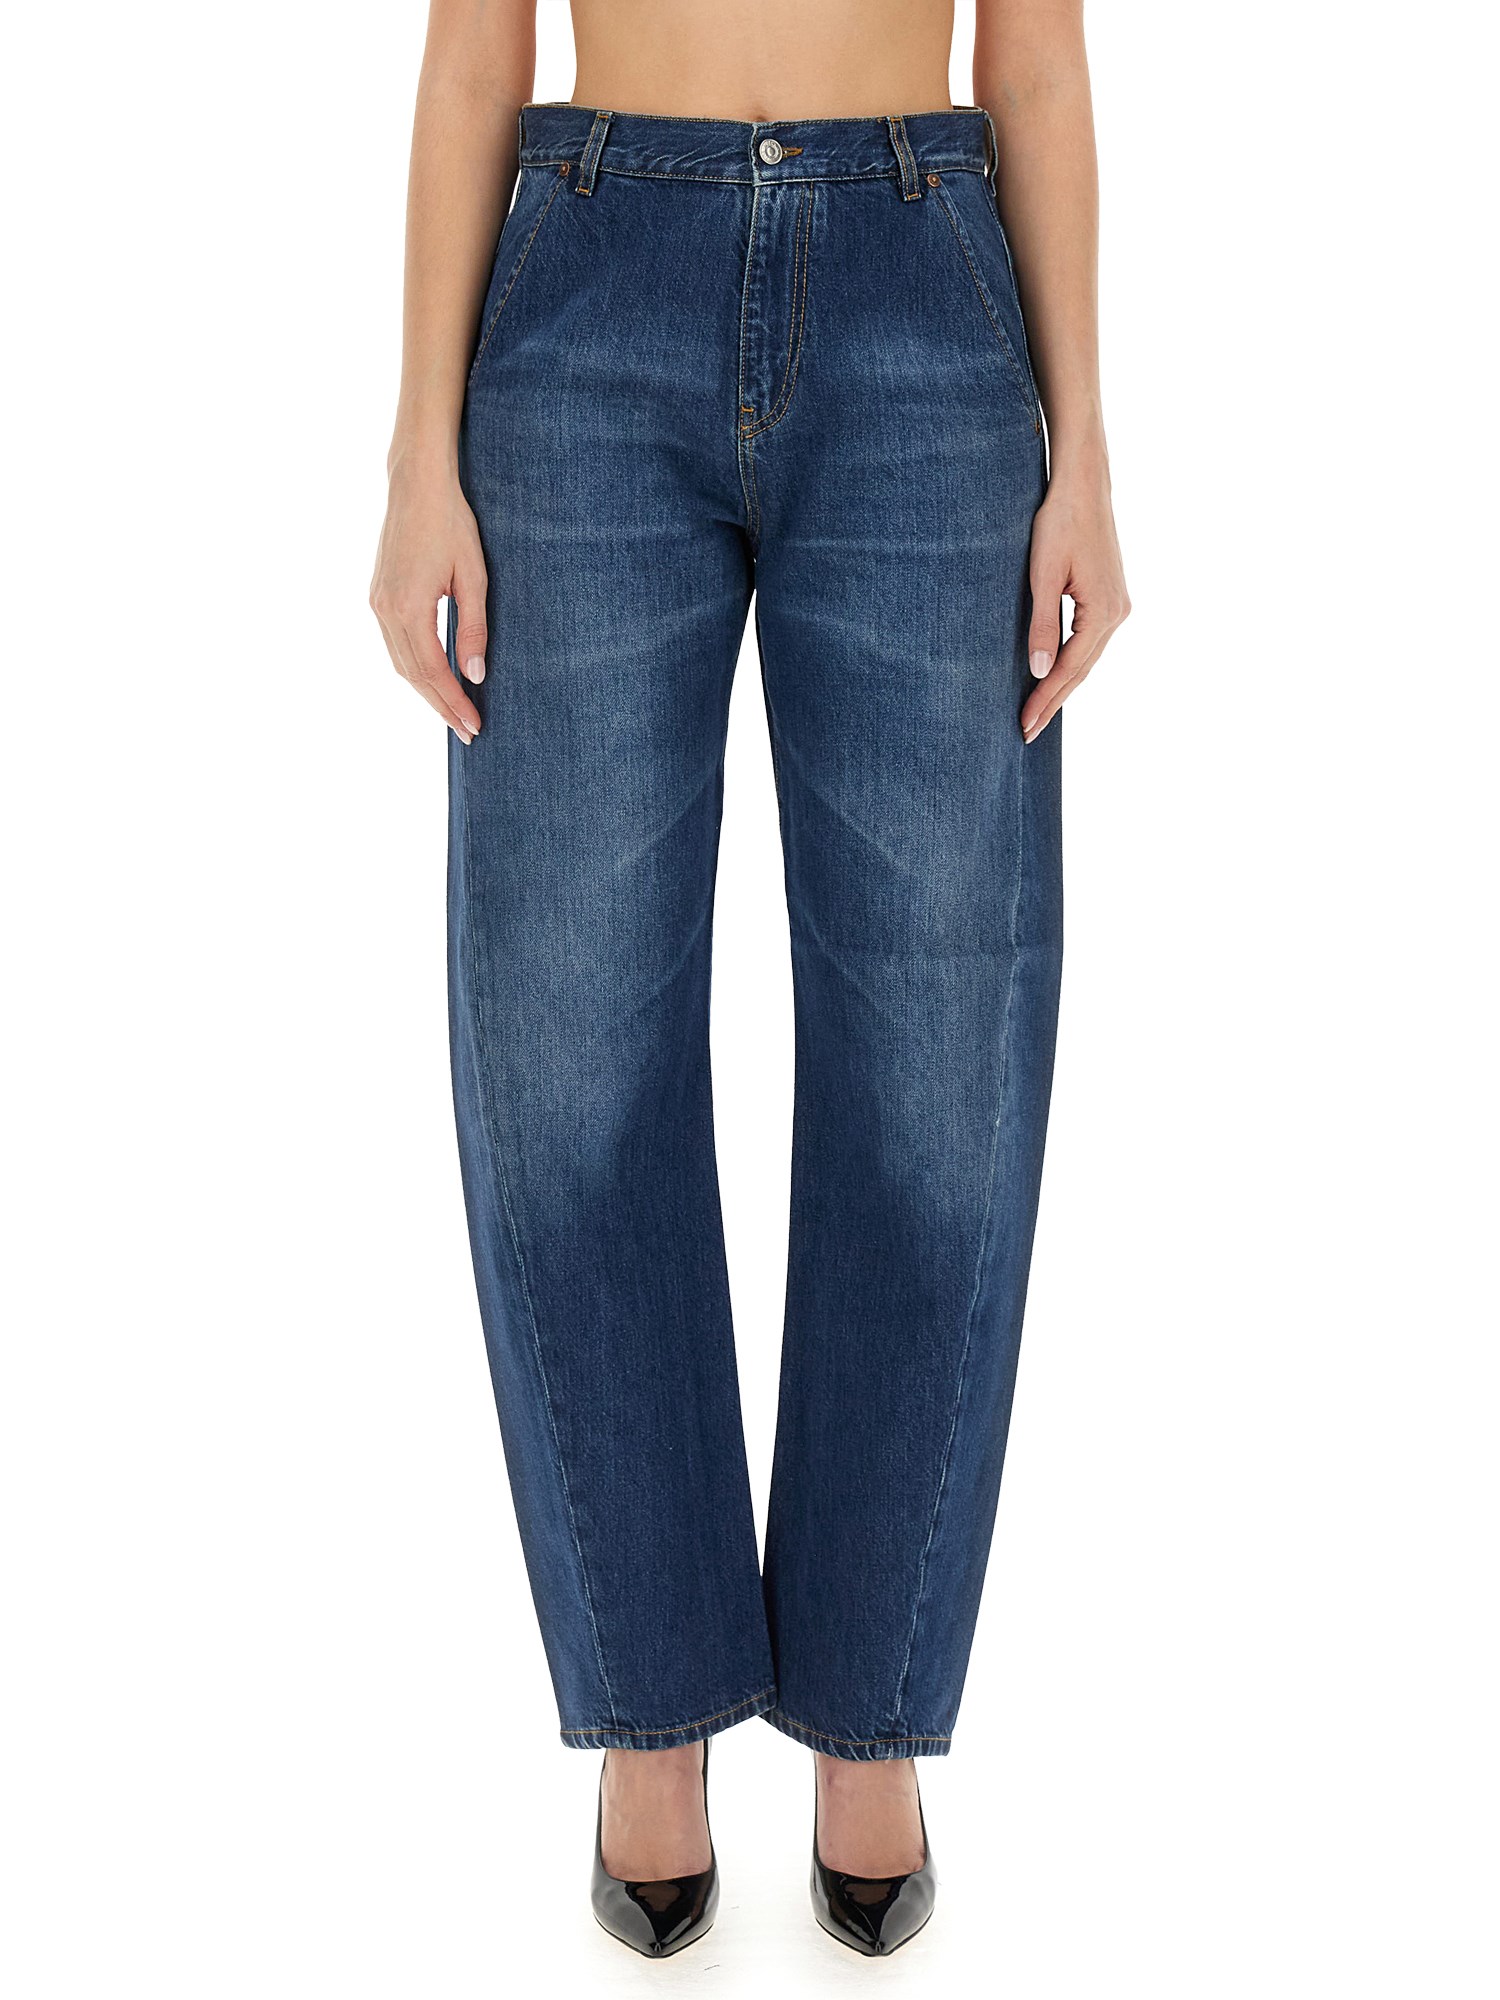 victoria beckham twisted jeans